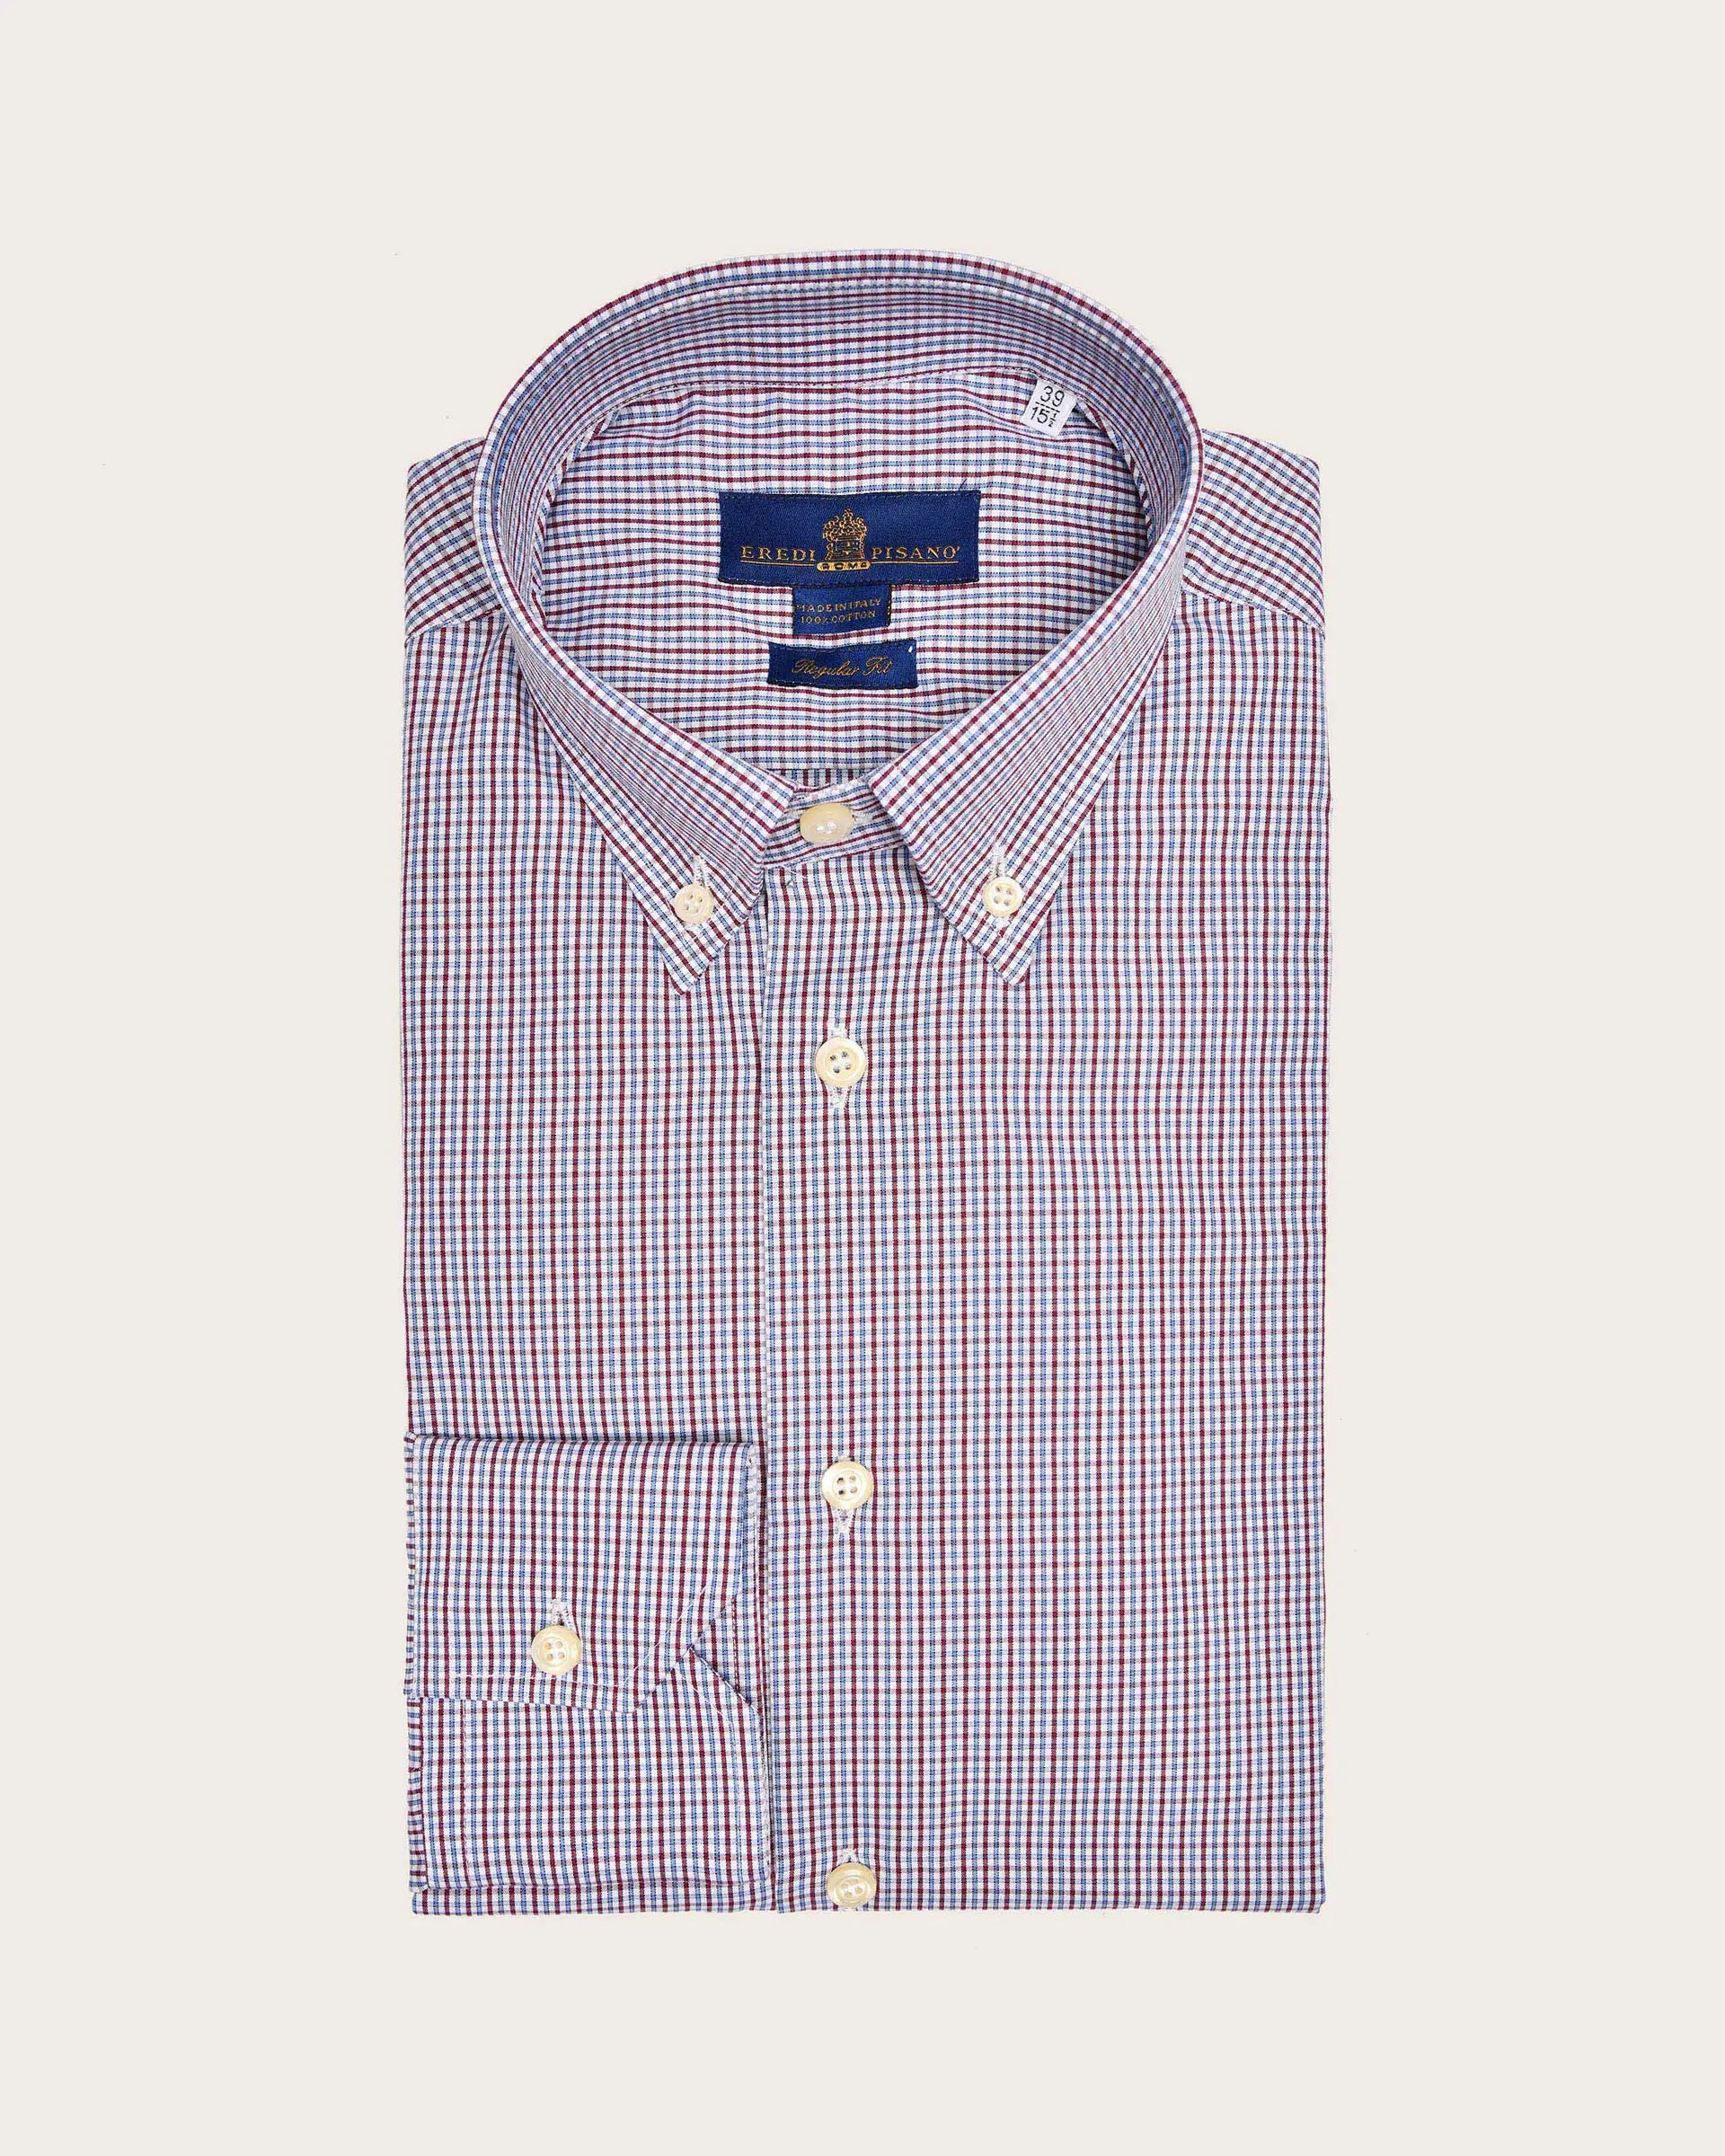 Regular fit microcheck shirt with button down collar